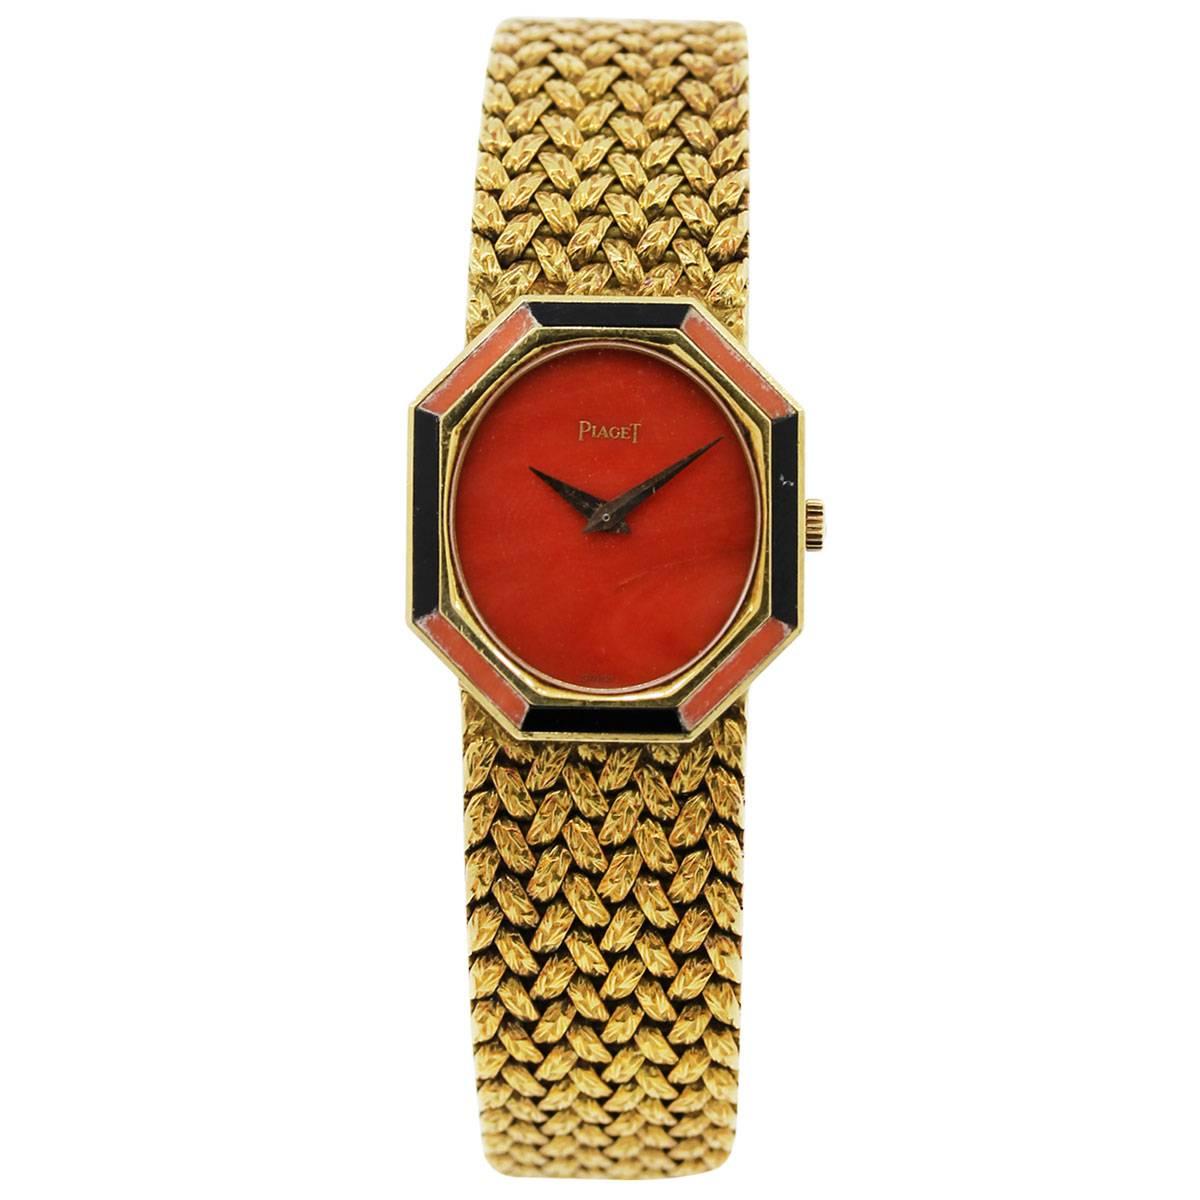 Brand: Piaget
MPN: P341D2
Case Material : 18k Yellow Gold
Dial 	Coral Stone
Bezel: Coral & Onyx Stone Octagon Shaped Bezel
Case Measurements: 26.5mm x 23.5mm
Bracelet: 18k Yellow Gold Braided Rope Bracelet
Clasp: Piaget Jewelers Clasp
Movement: Hand